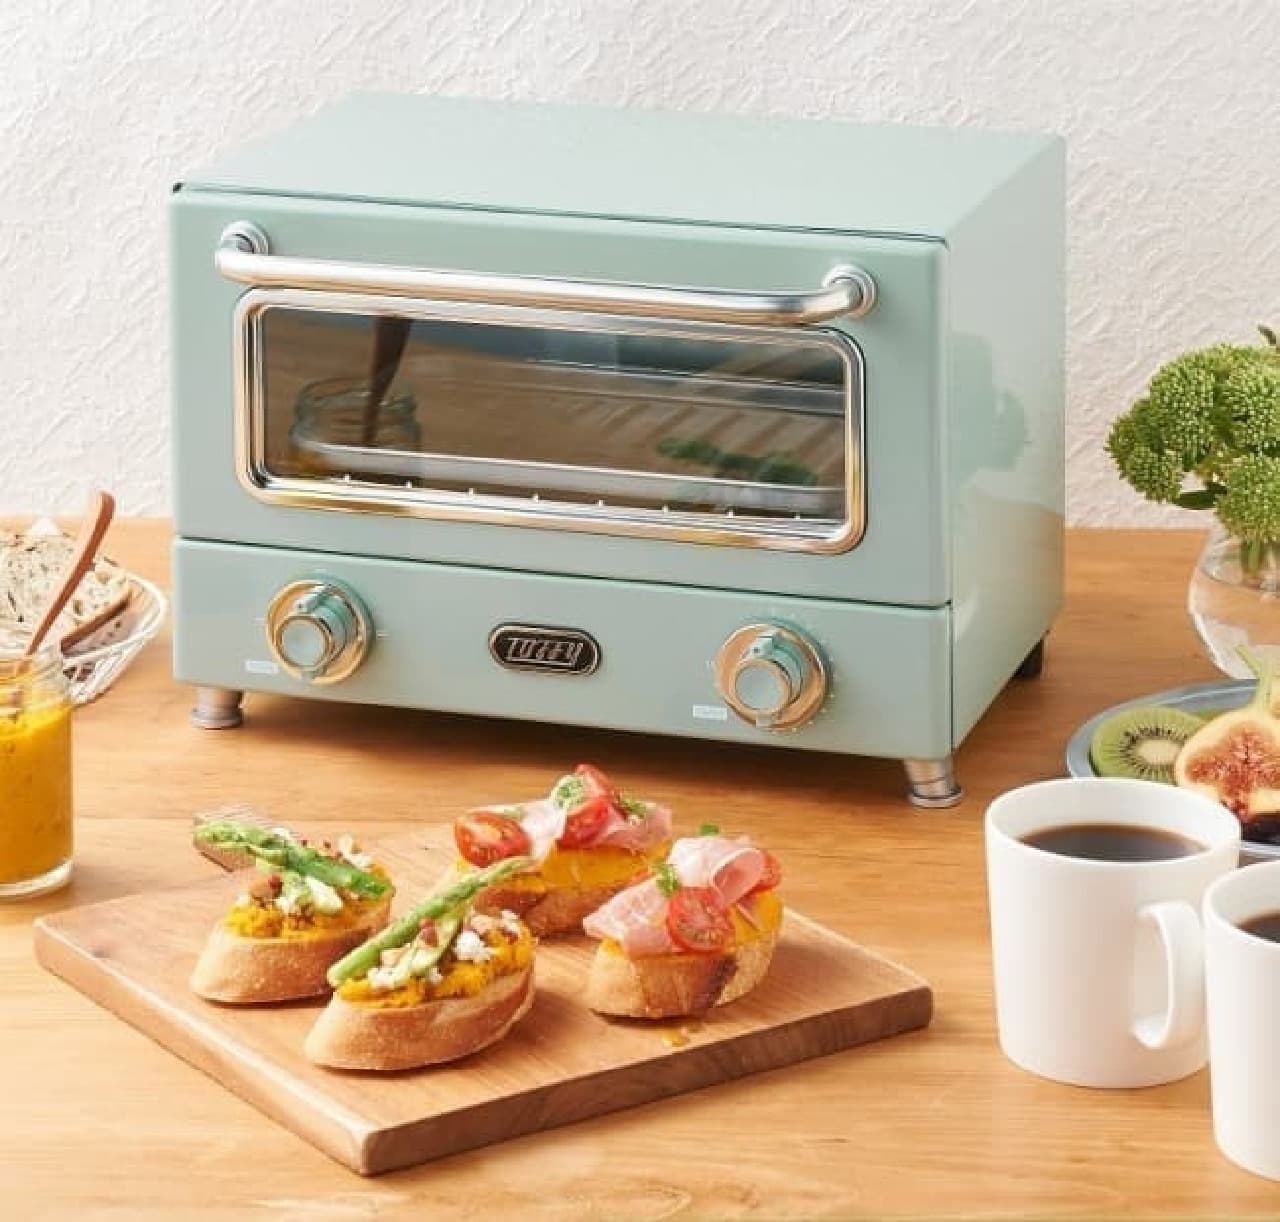 Toffy's first horizontal oven toaster--two slices of bread at the same time, brown and fluffy